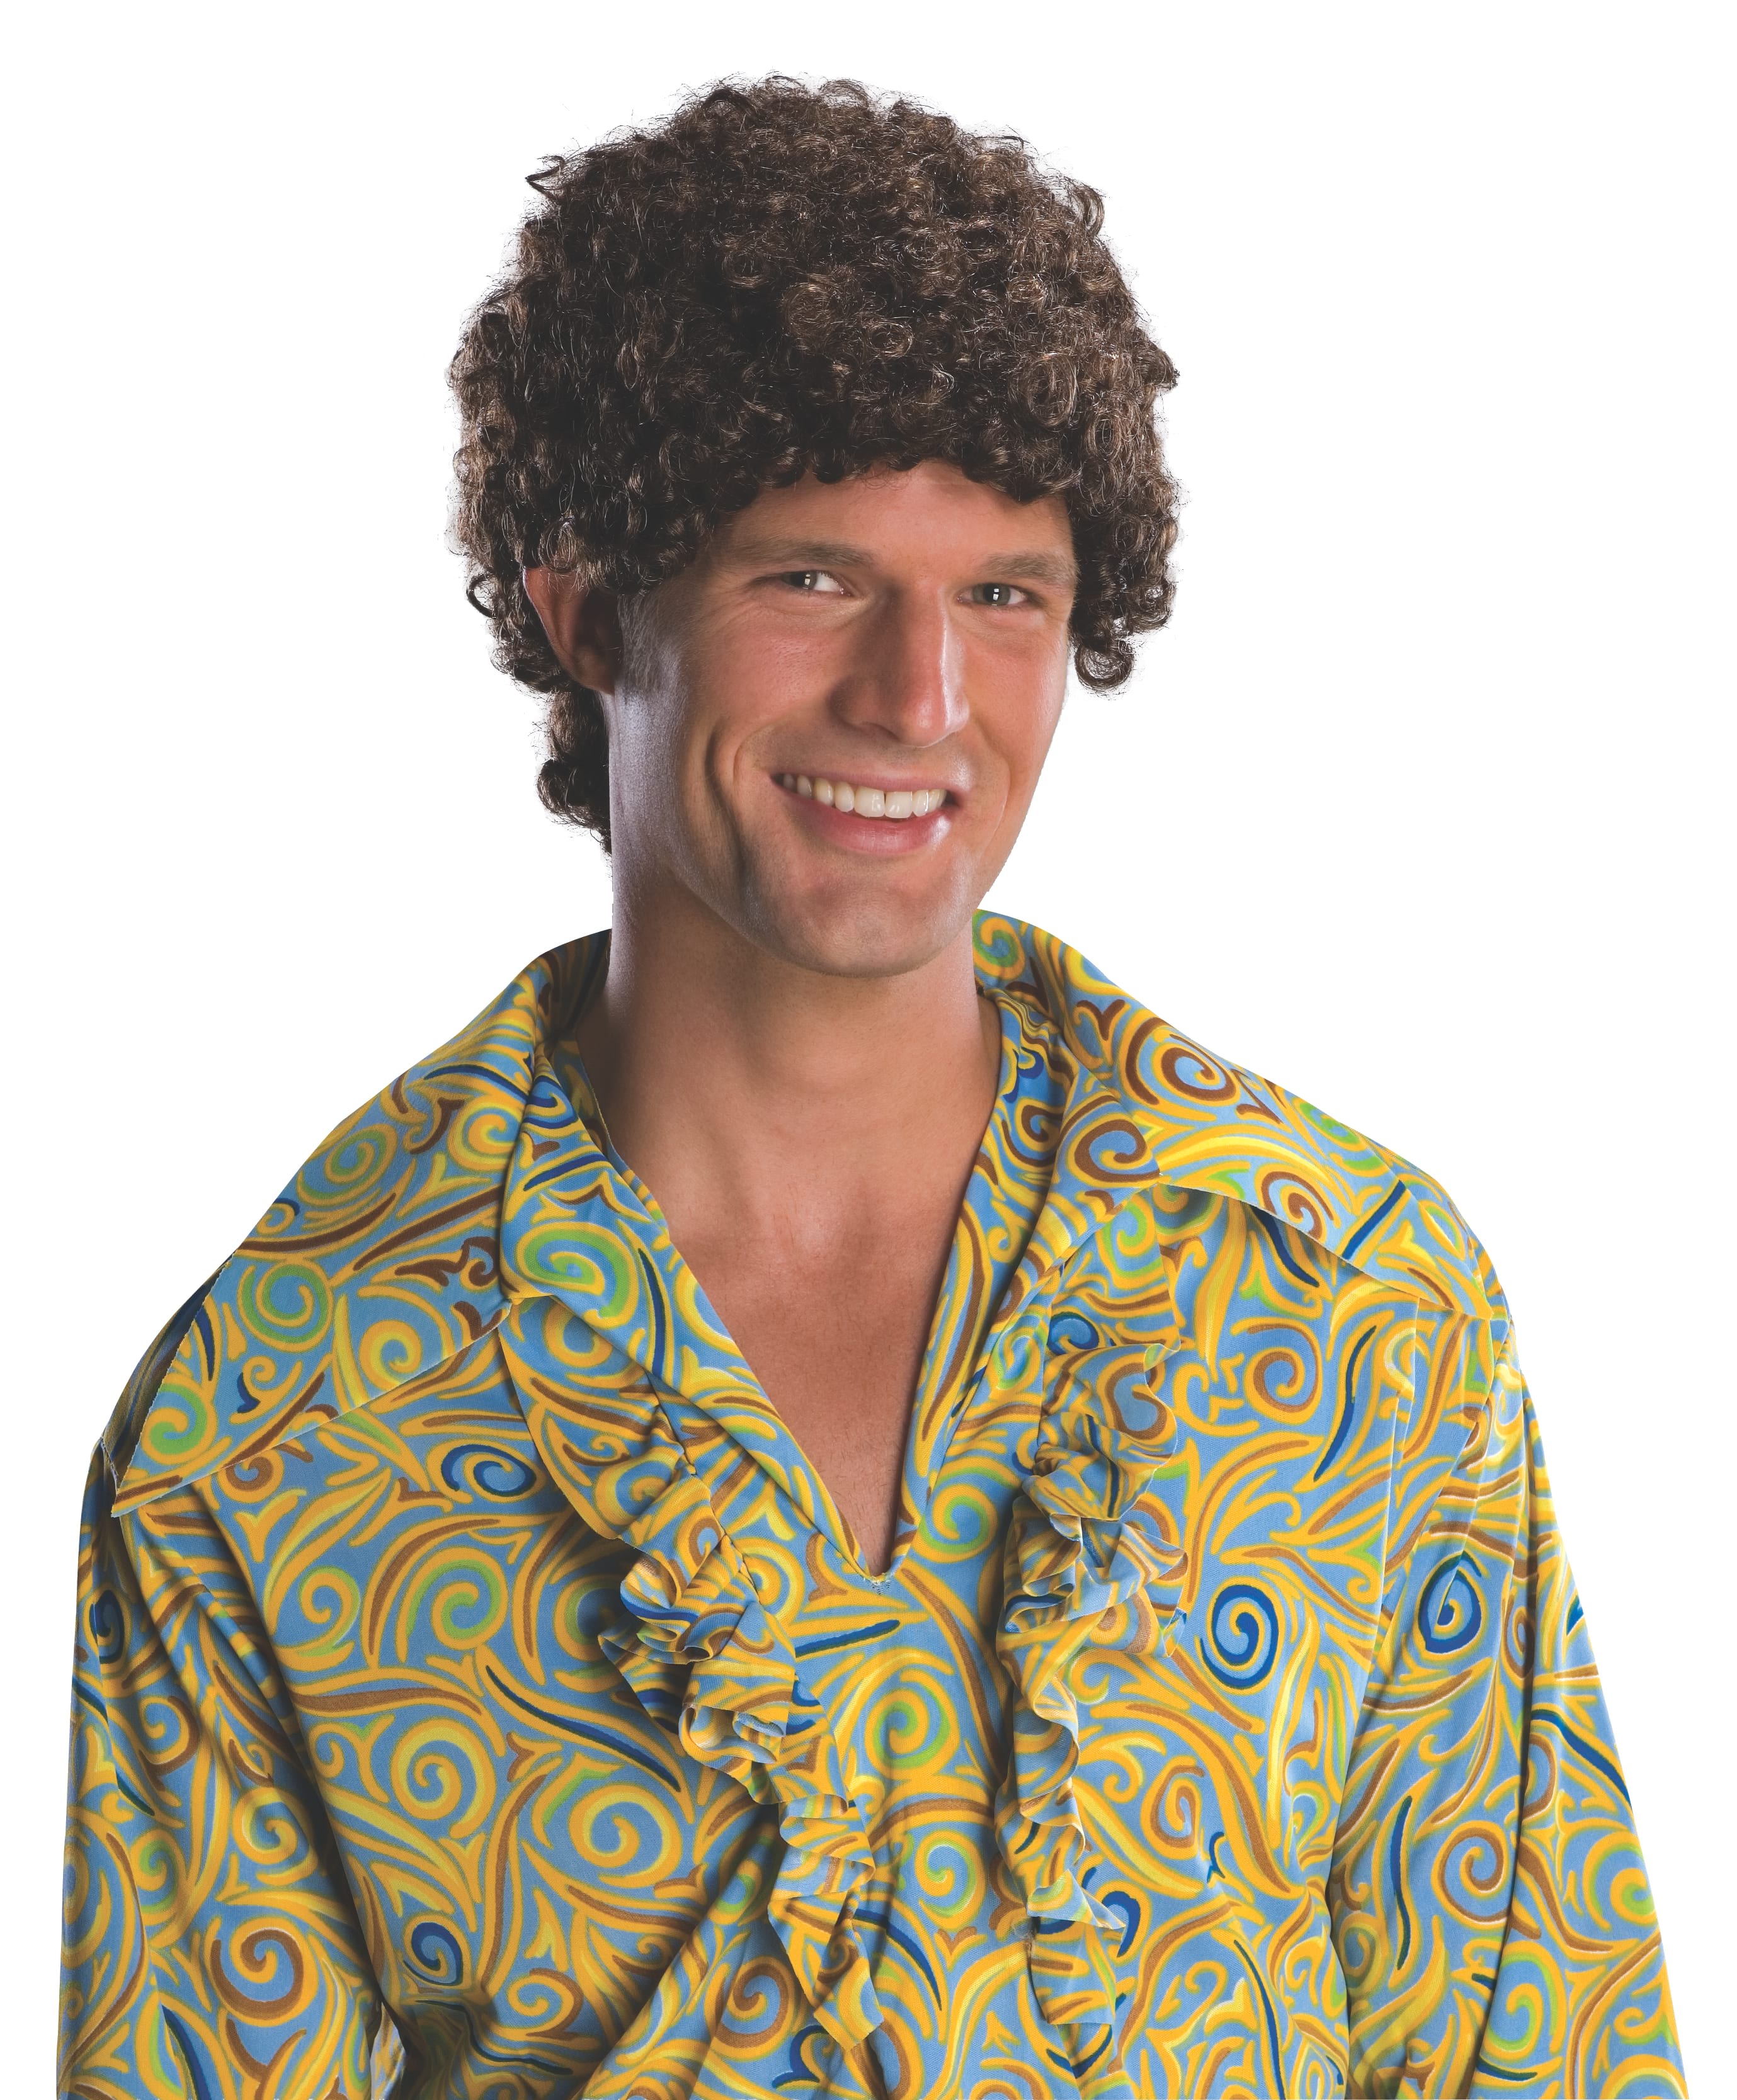 Brunette Tight Afro Wig Adult